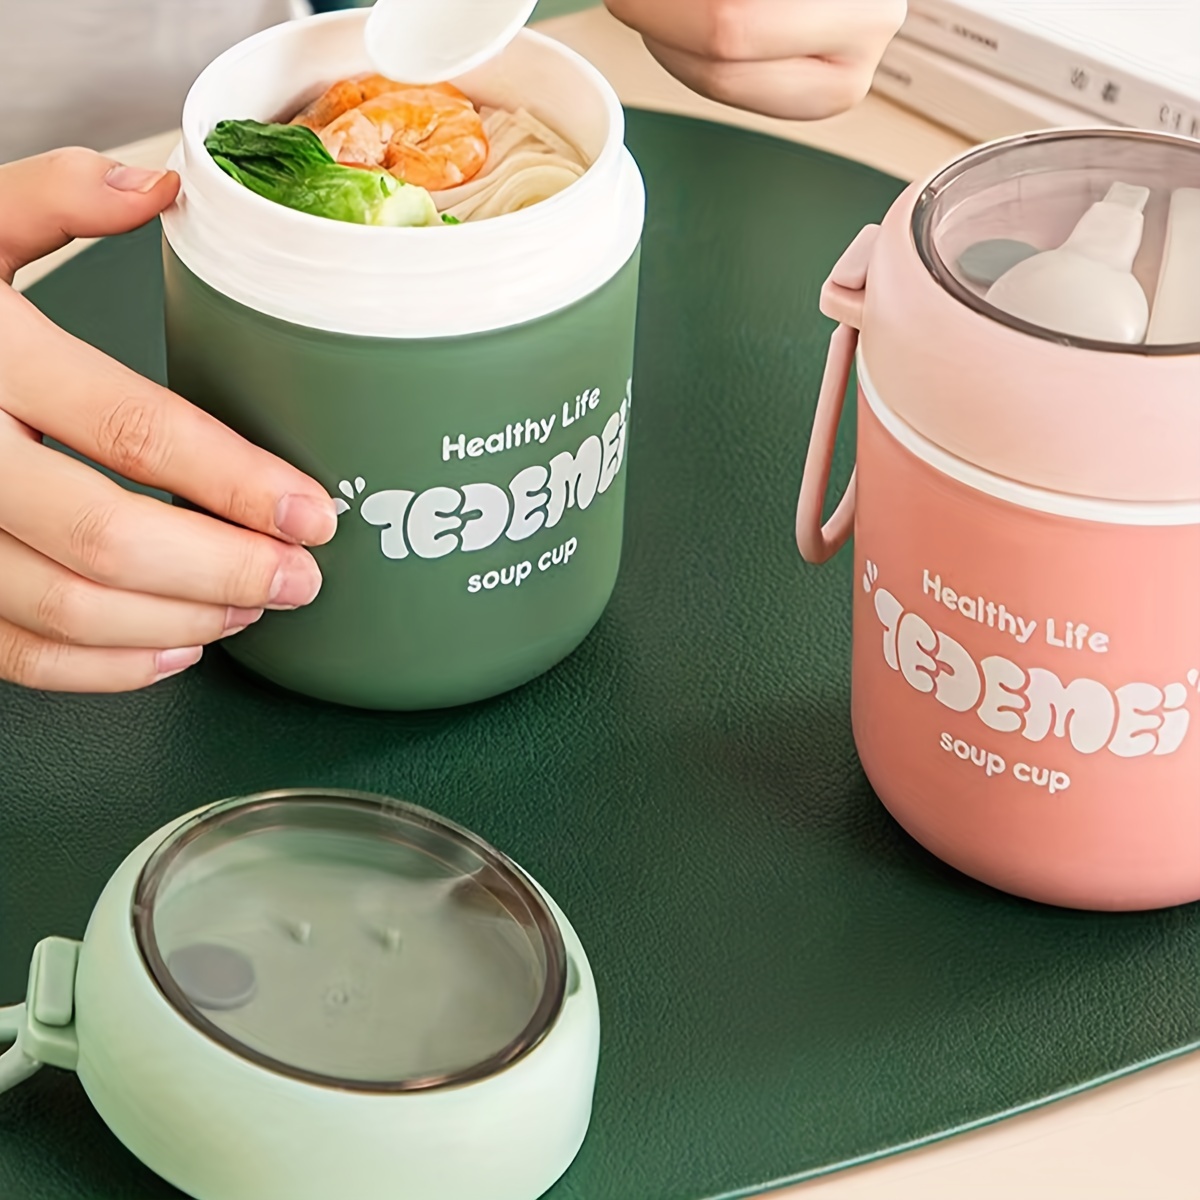 https://img.kwcdn.com/product/insulated-soup-cup/d69d2f15w98k18-b0aa3a17/open/2023-08-26/1693041597201-47fceab4f95641699268815ece45a901-goods.jpeg?imageView2/2/w/500/q/60/format/webp